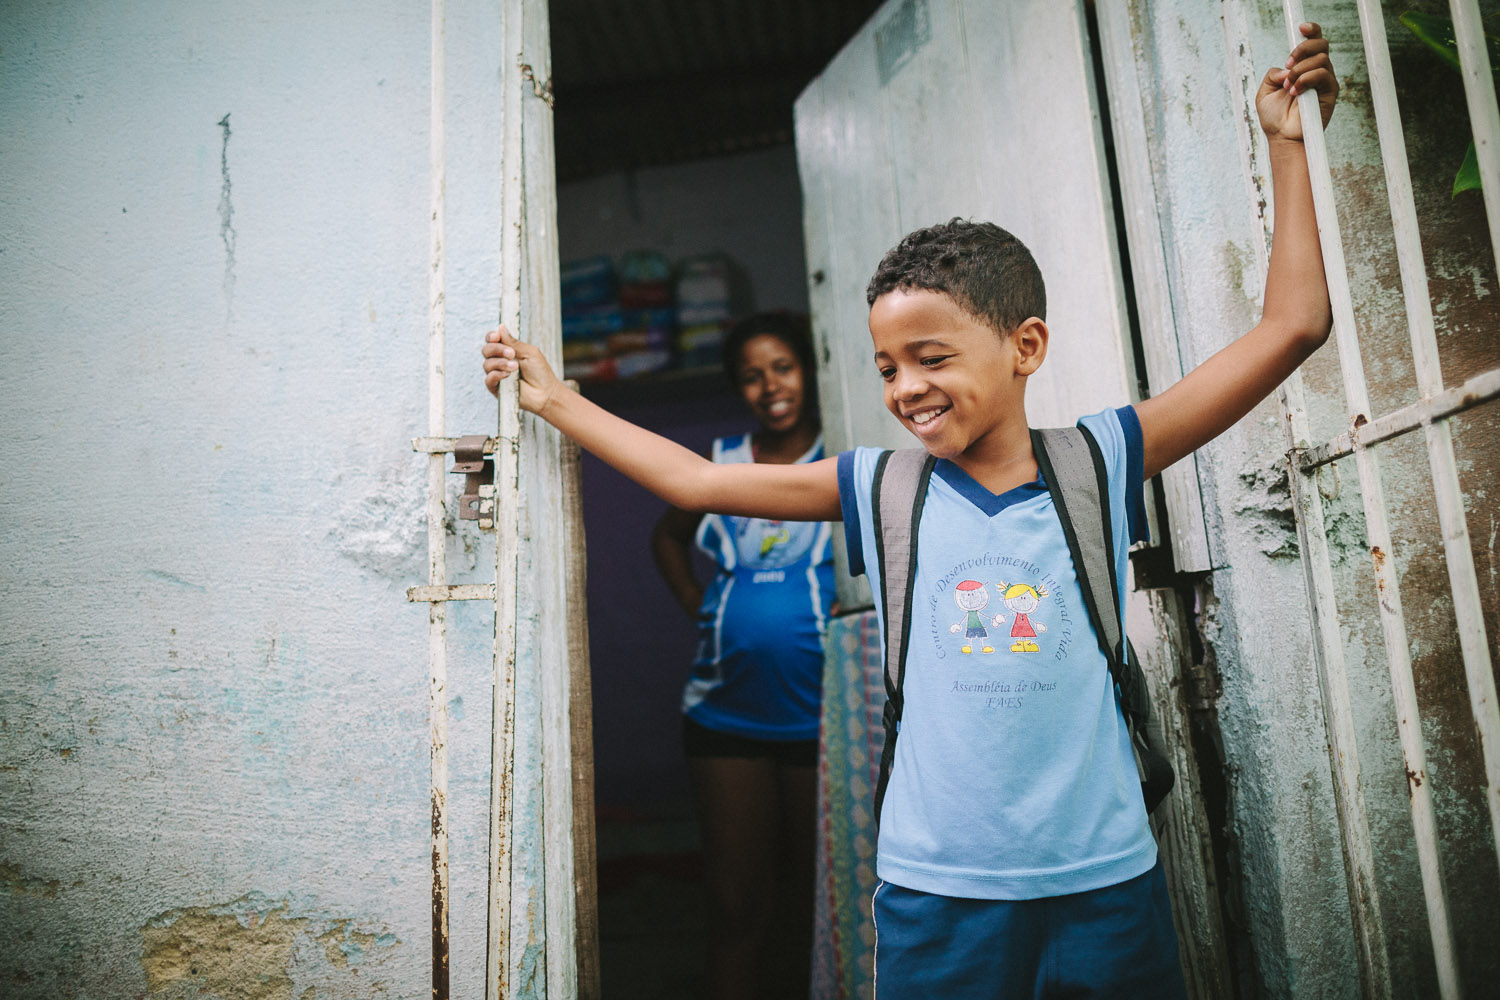   Getting ready to head to classes at the Compassion Center. Emidio's entire house (housing 4 people---soon to be 5) is perhaps no larger than 8 feet by 10 feet. This is Emidio's morning routine before heading to classes at the Compassion Center.  